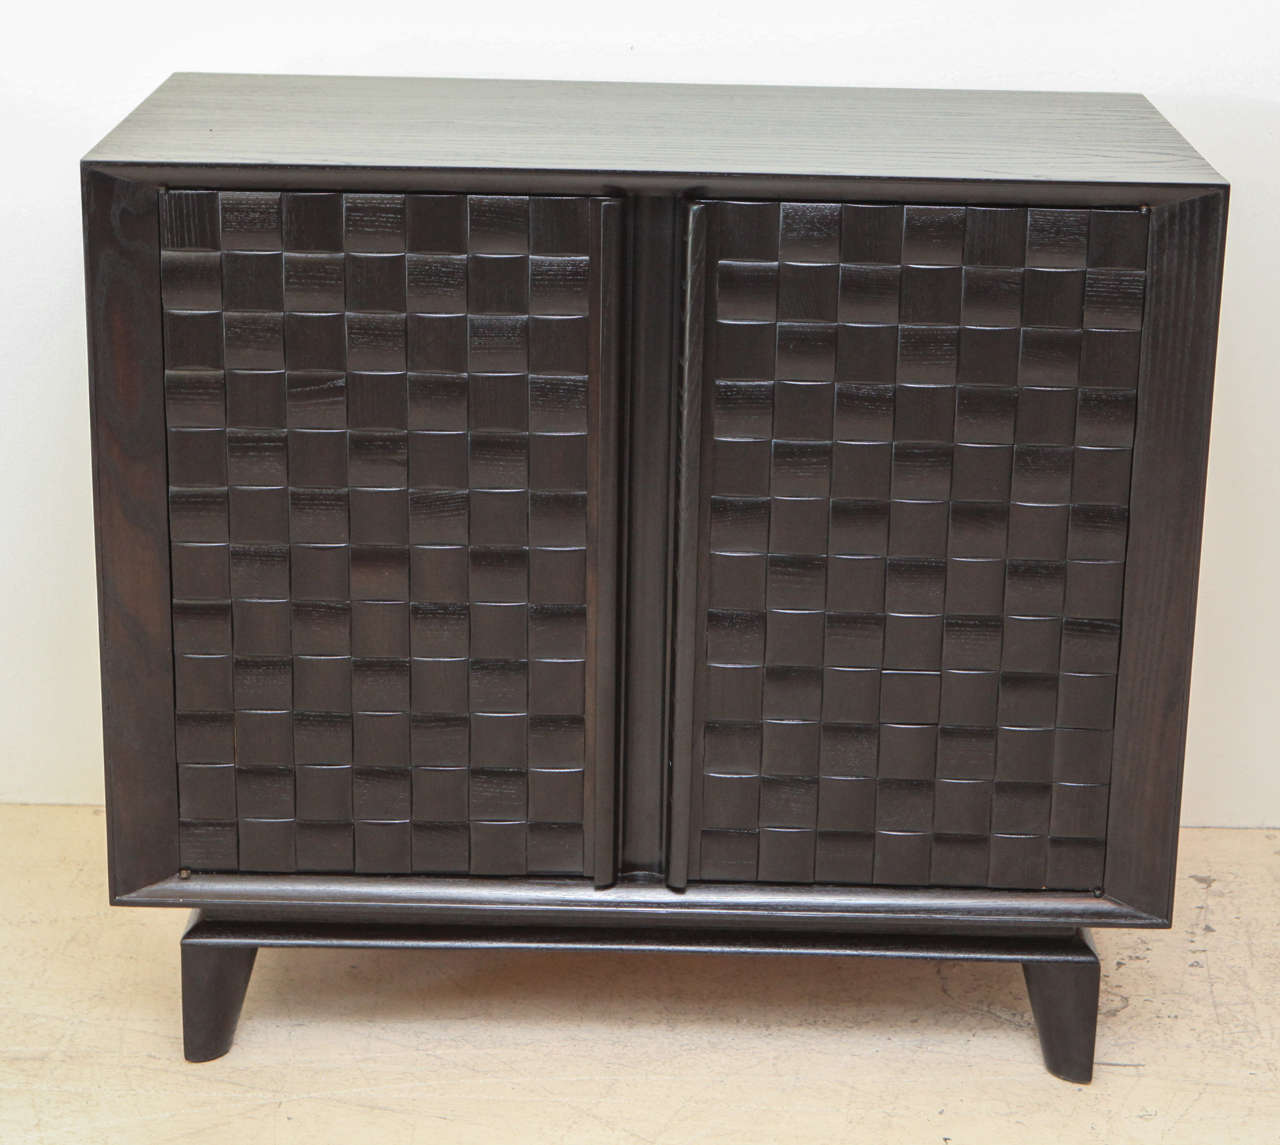 Two-door ebonized Paul Laszlo cabinet with basket weave carved front. Interior has shelves. Would make a great bar!